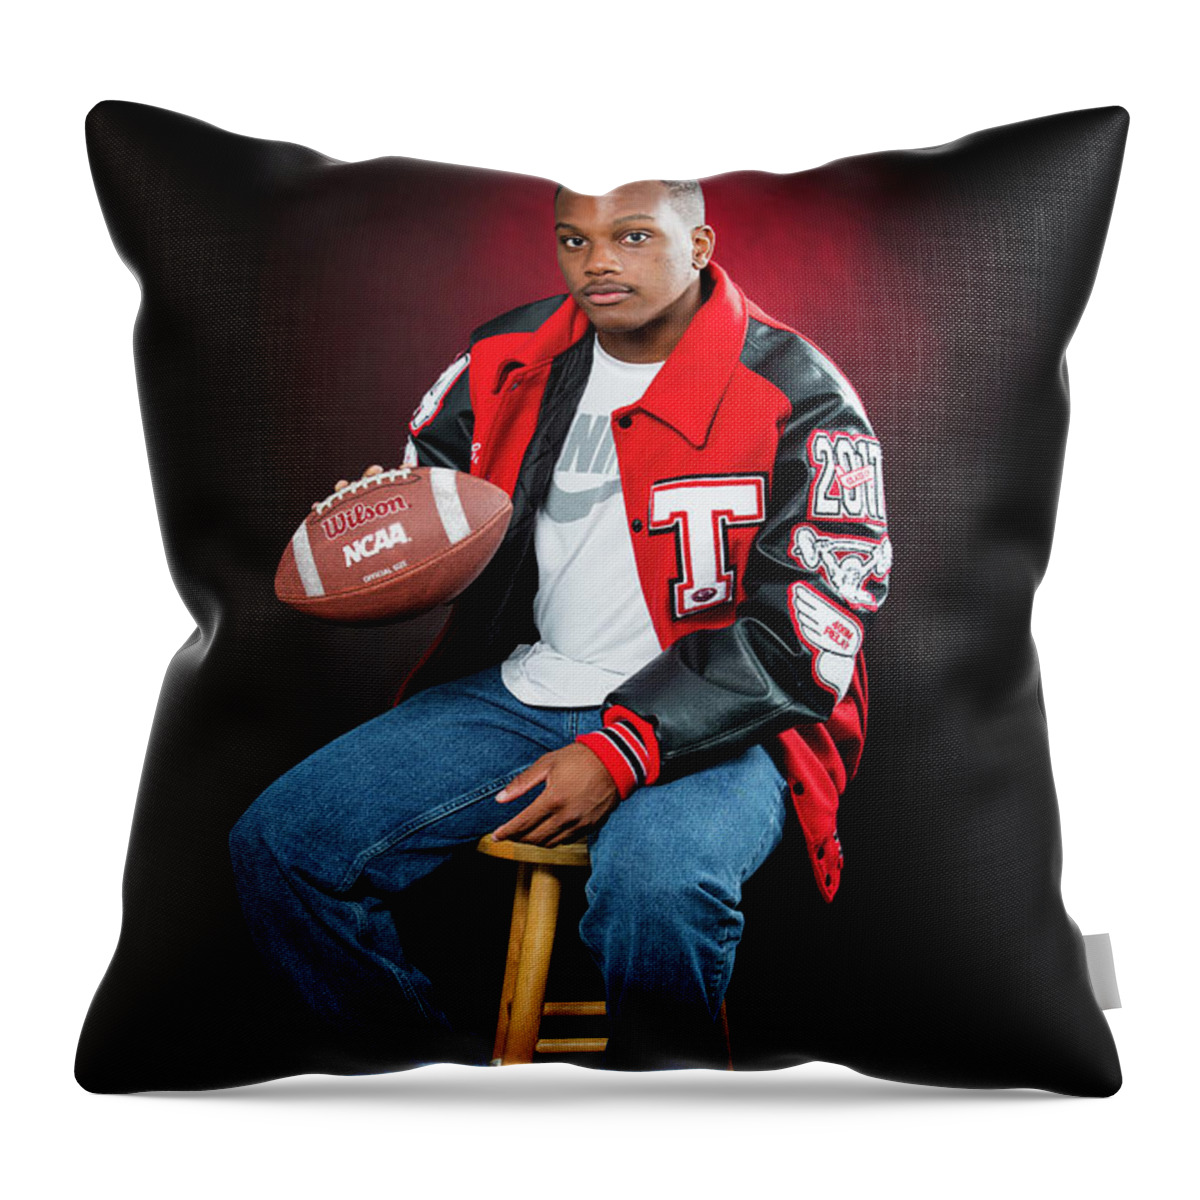 Cameron Throw Pillow featuring the photograph Cameron 014 by M K Miller